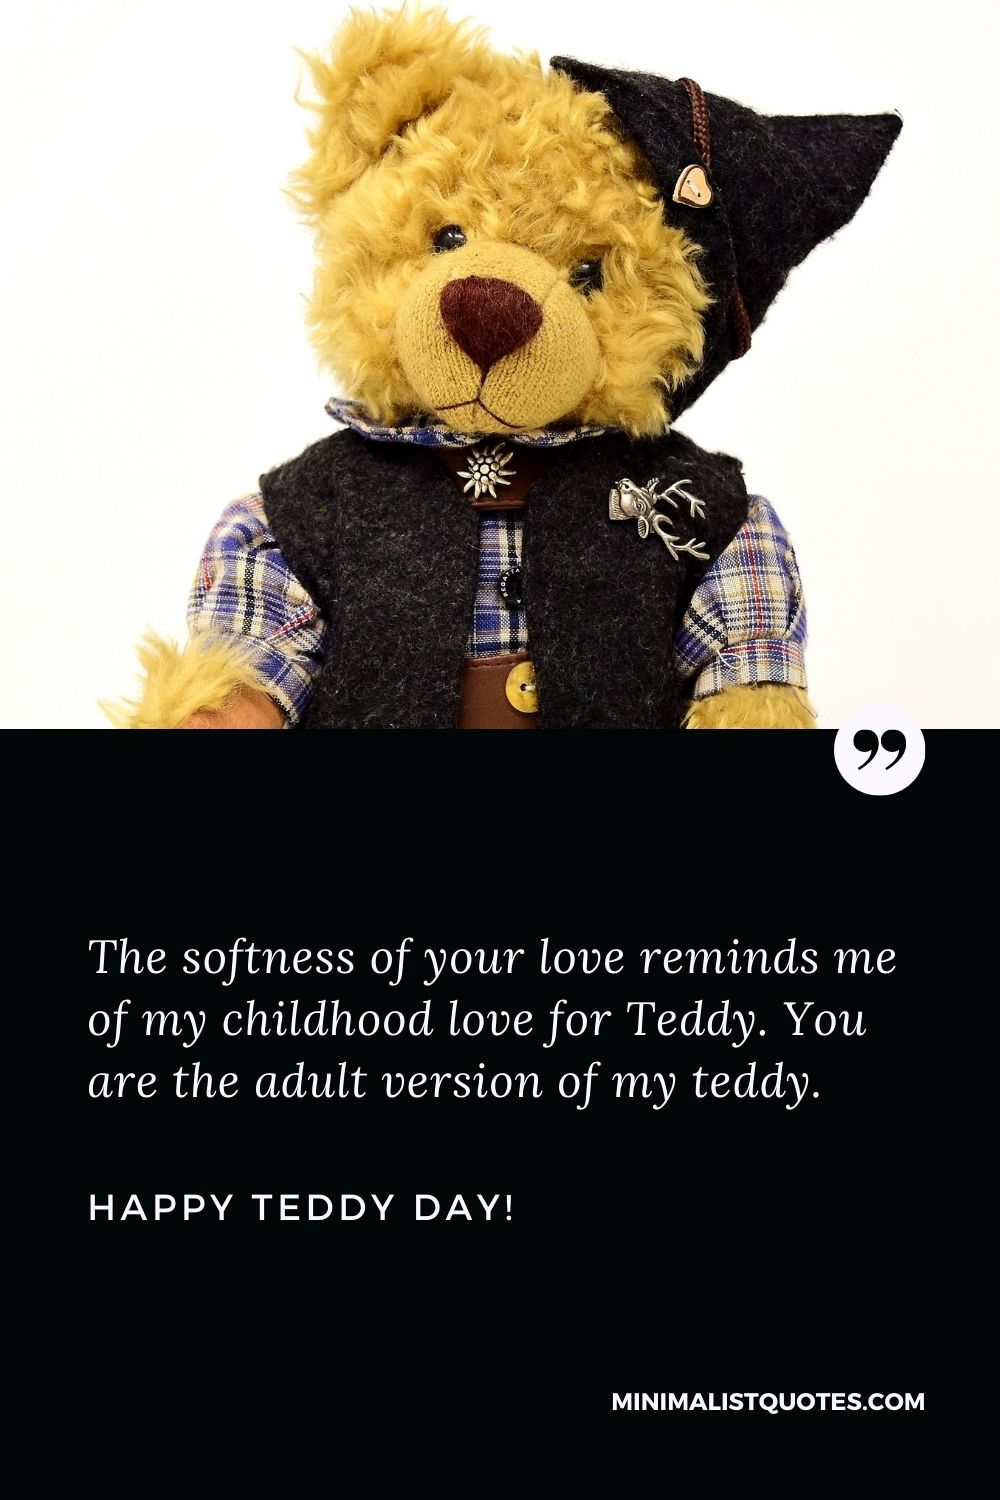 The softness of your love reminds me of my childhood love for Teddy